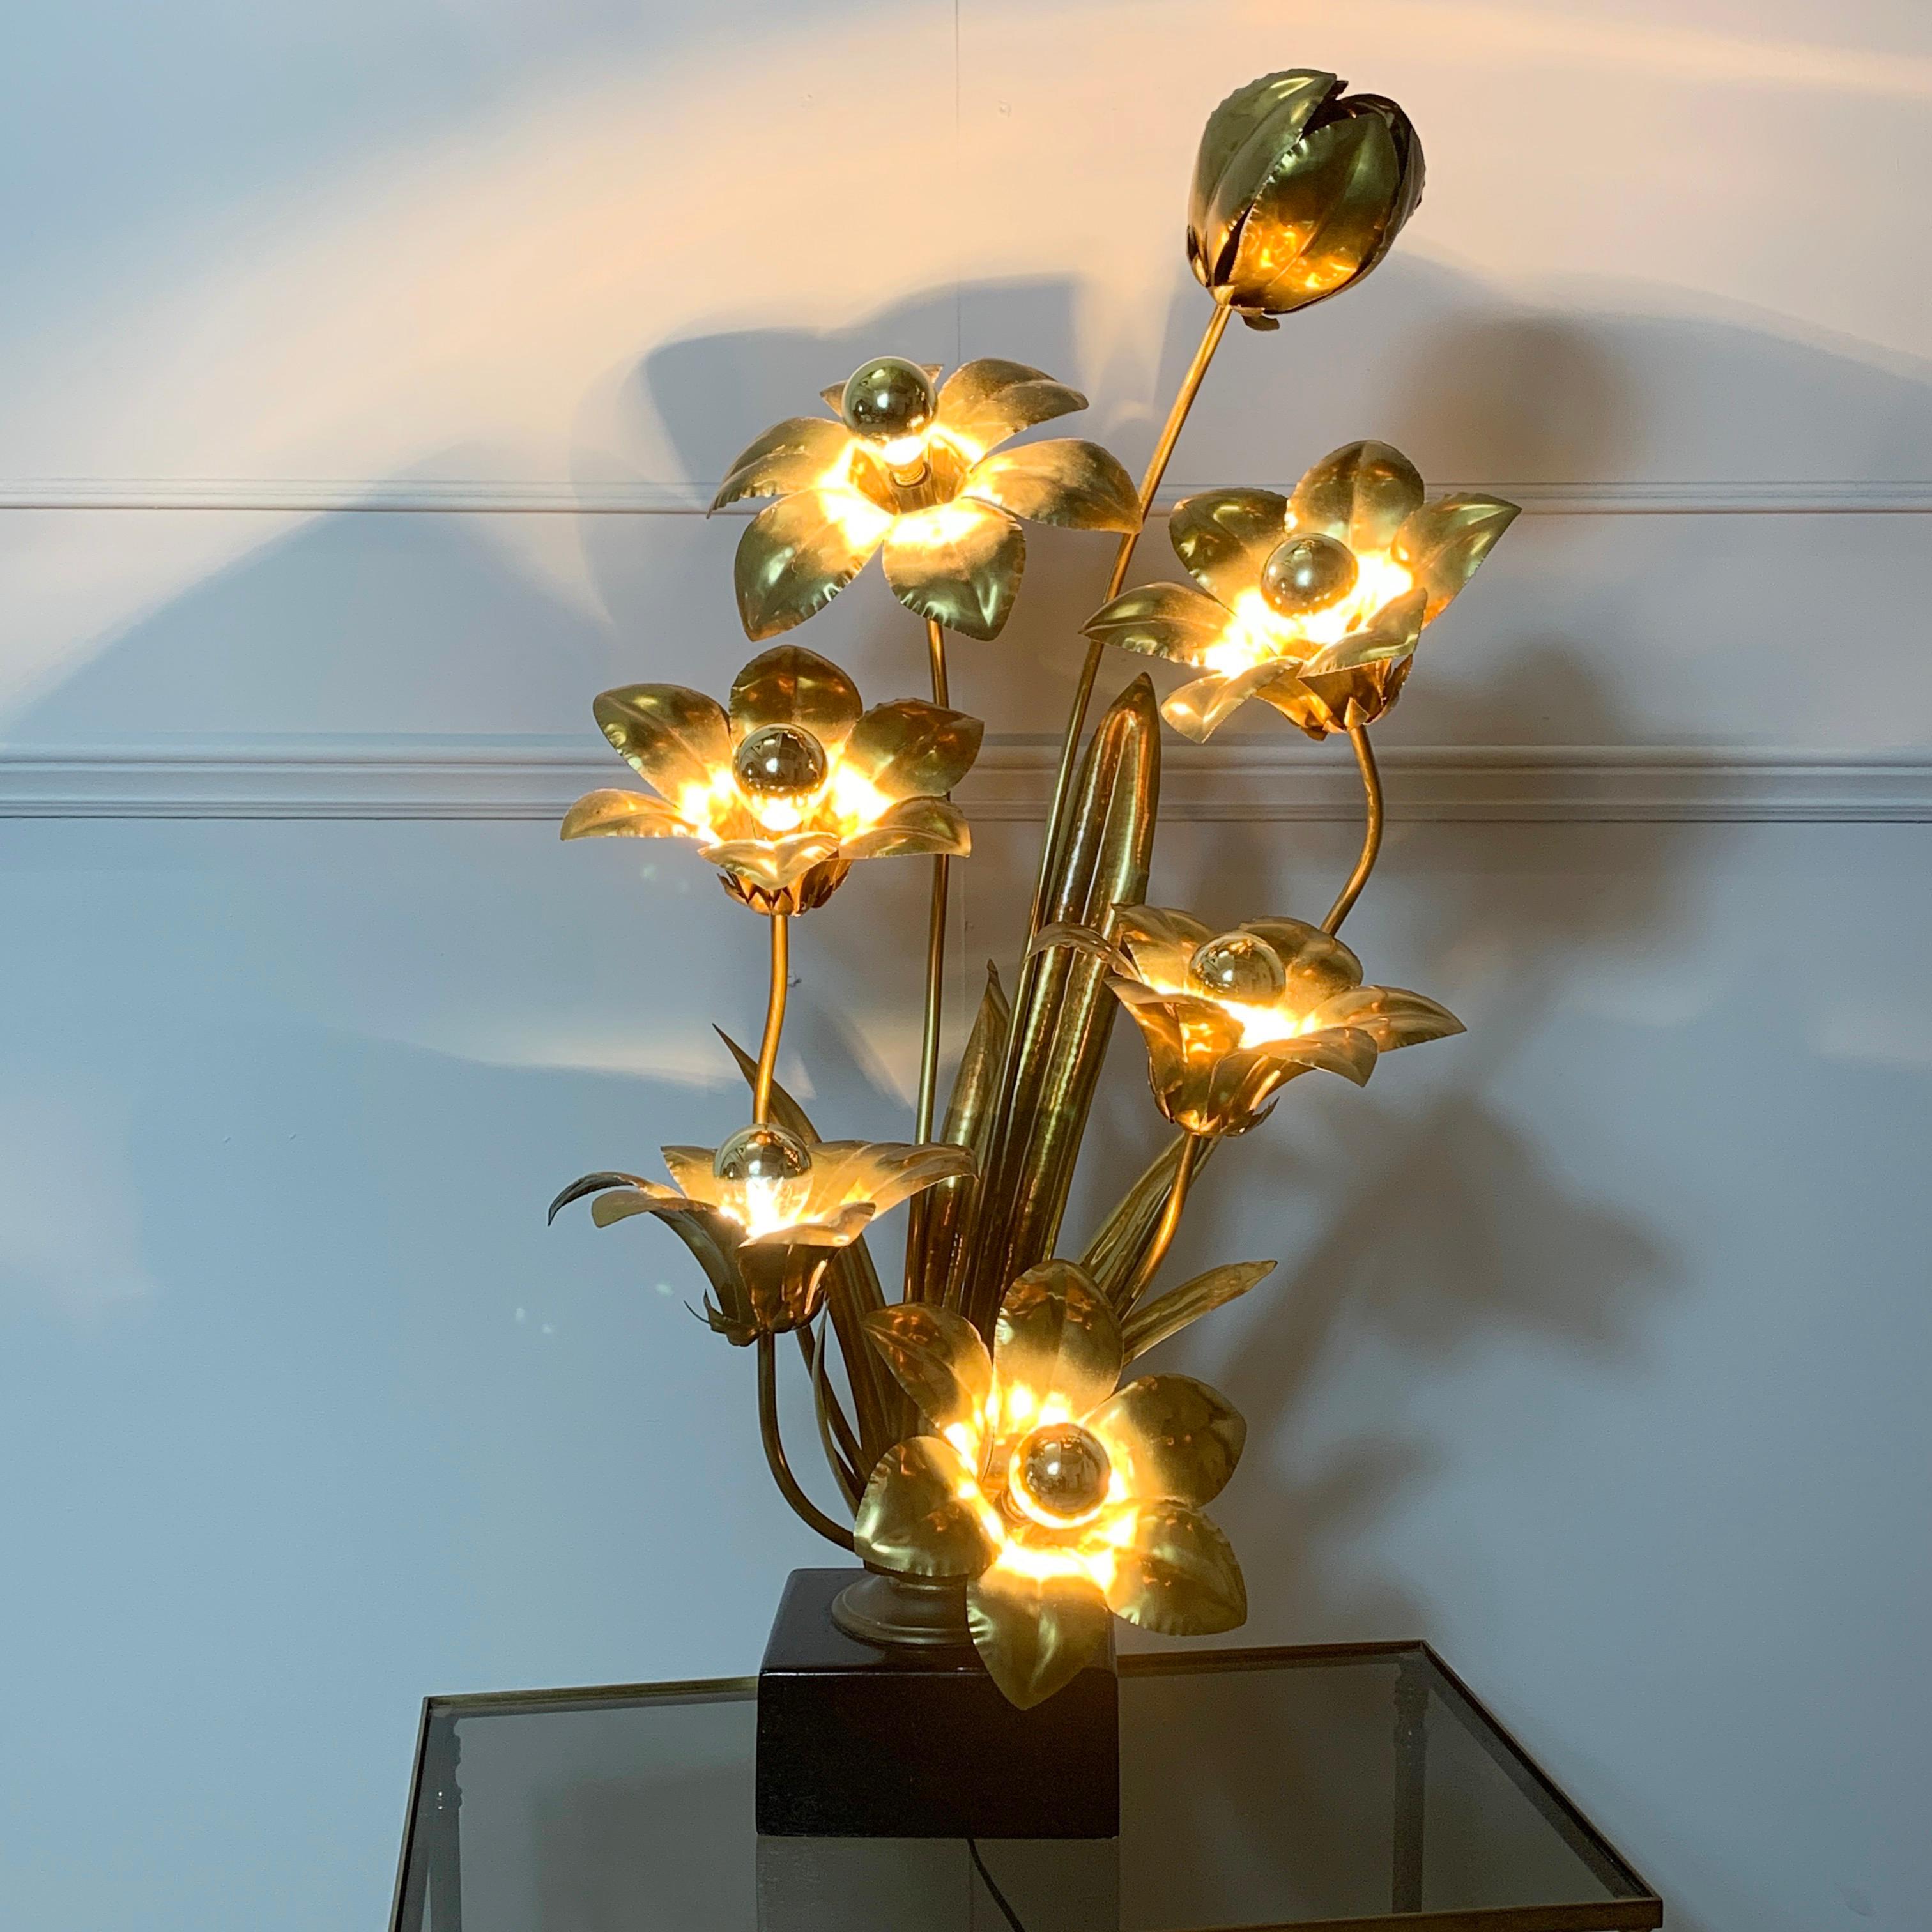 Midcentury brass flower table lamp, France, 1970s
Stunning large lamp depicting 5 flower heads and a bud
Height 80cm, width 48cm, depth 32cm, base 16.5 x 14.5cm
The flowers each have a single lamp holder to the centre
There are broad brass